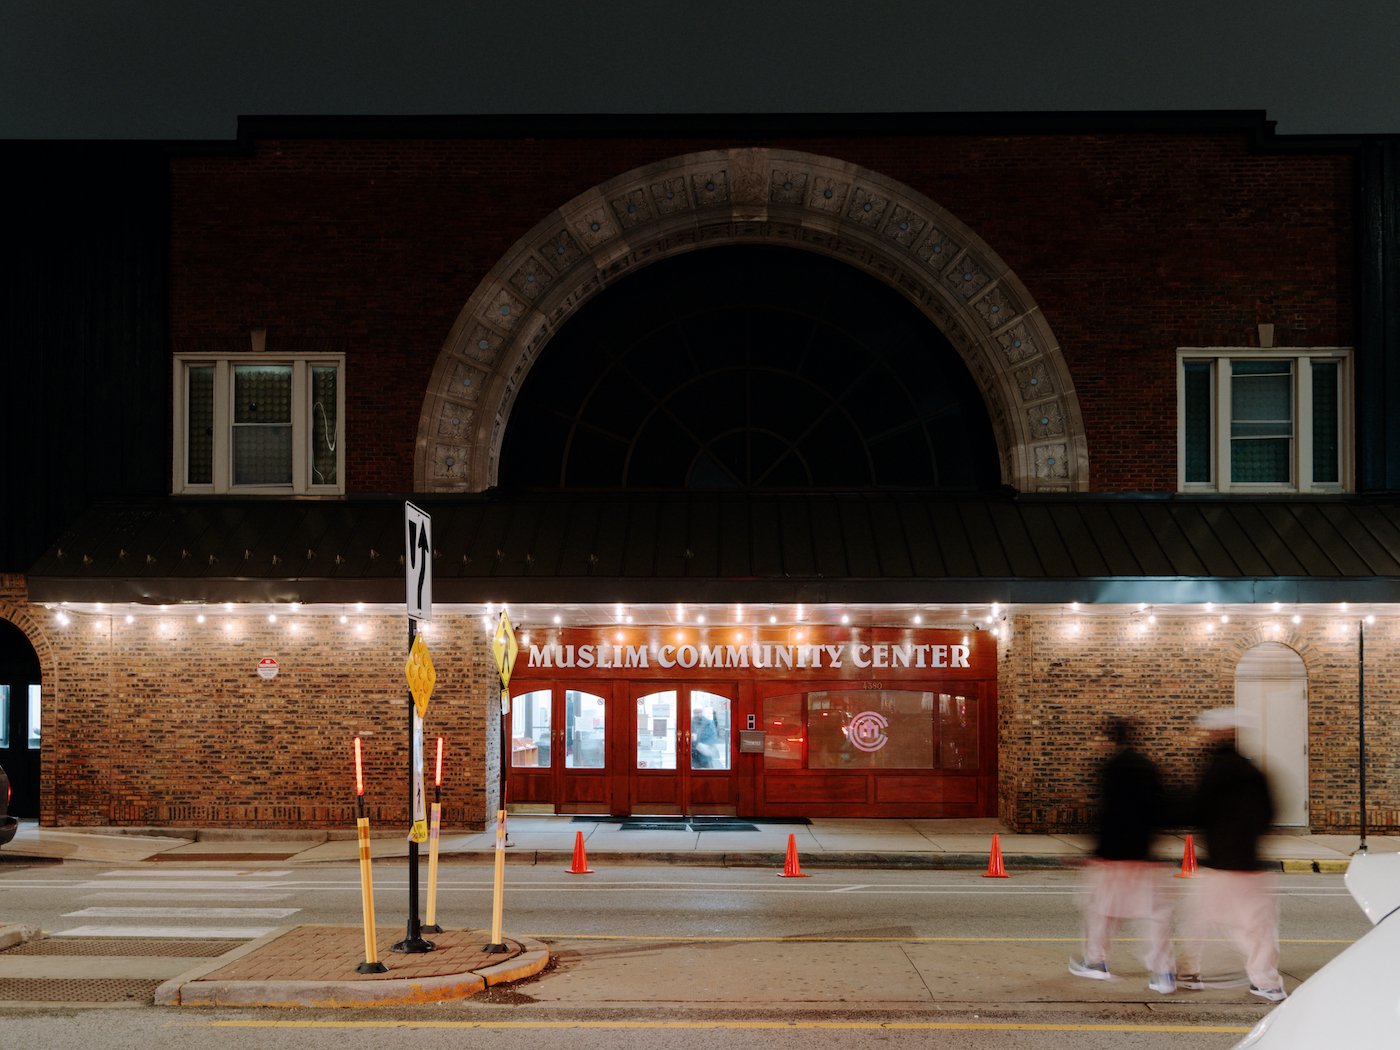 The arched exterior of the Muslim Community Center lit up at night